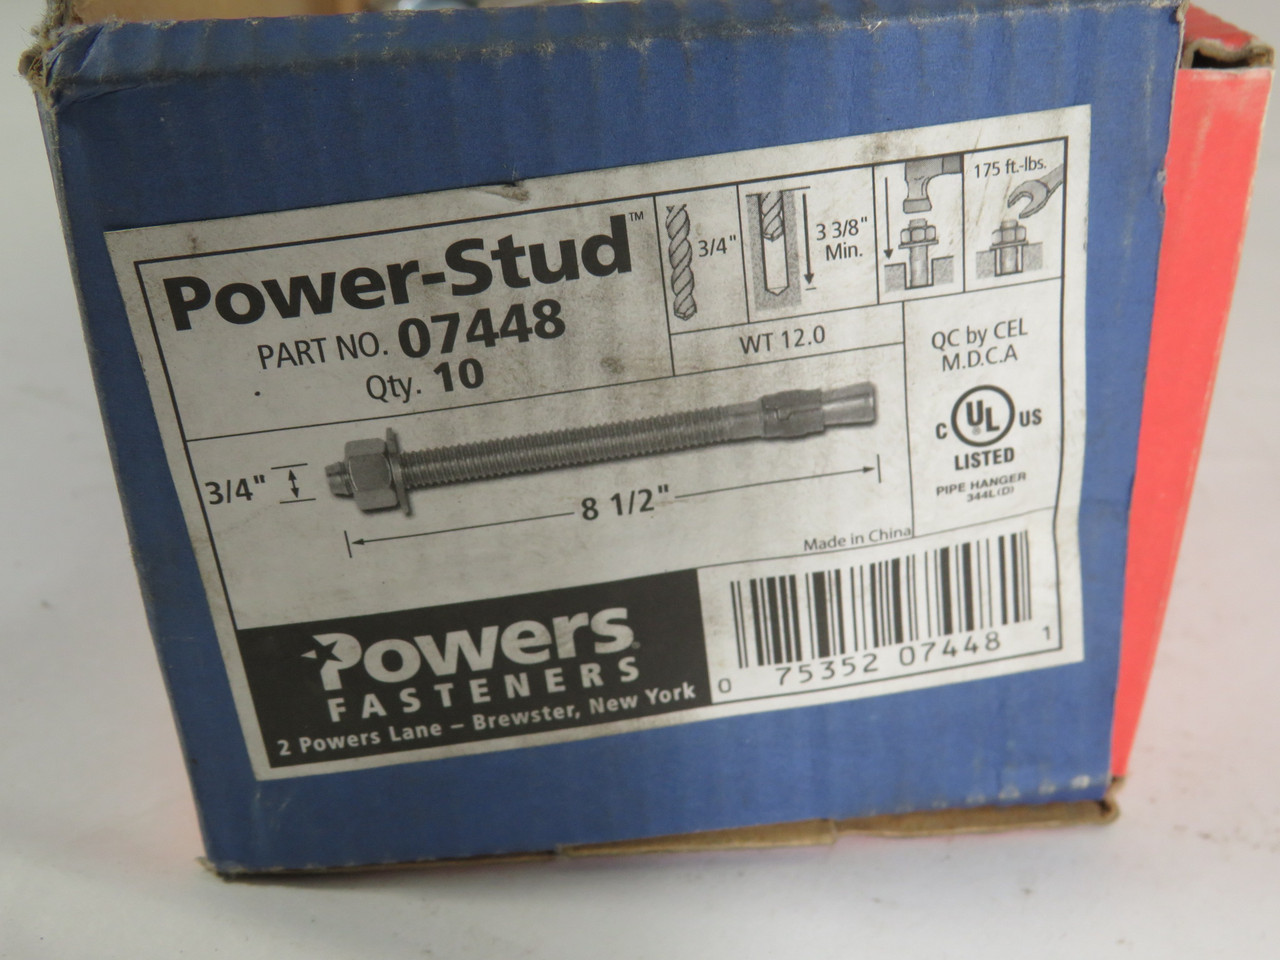 Powers Fasteners 07448 Power-Stud 8-1/2" x 3/4" Lot of 5 NEW